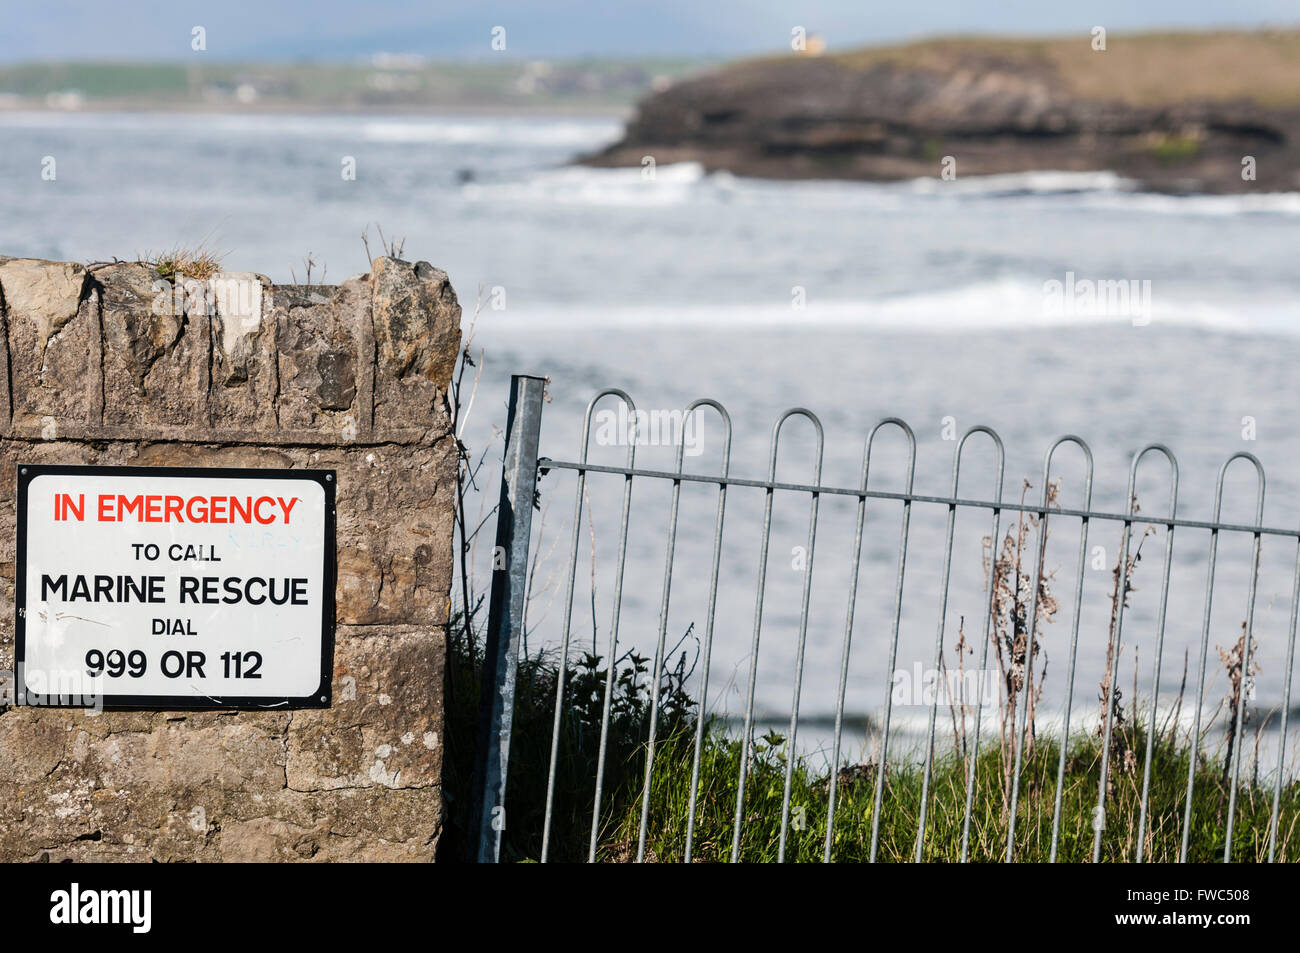 Sign at a sea front saying 'In emergency to call marine rescue dial 999 or 112' Stock Photo